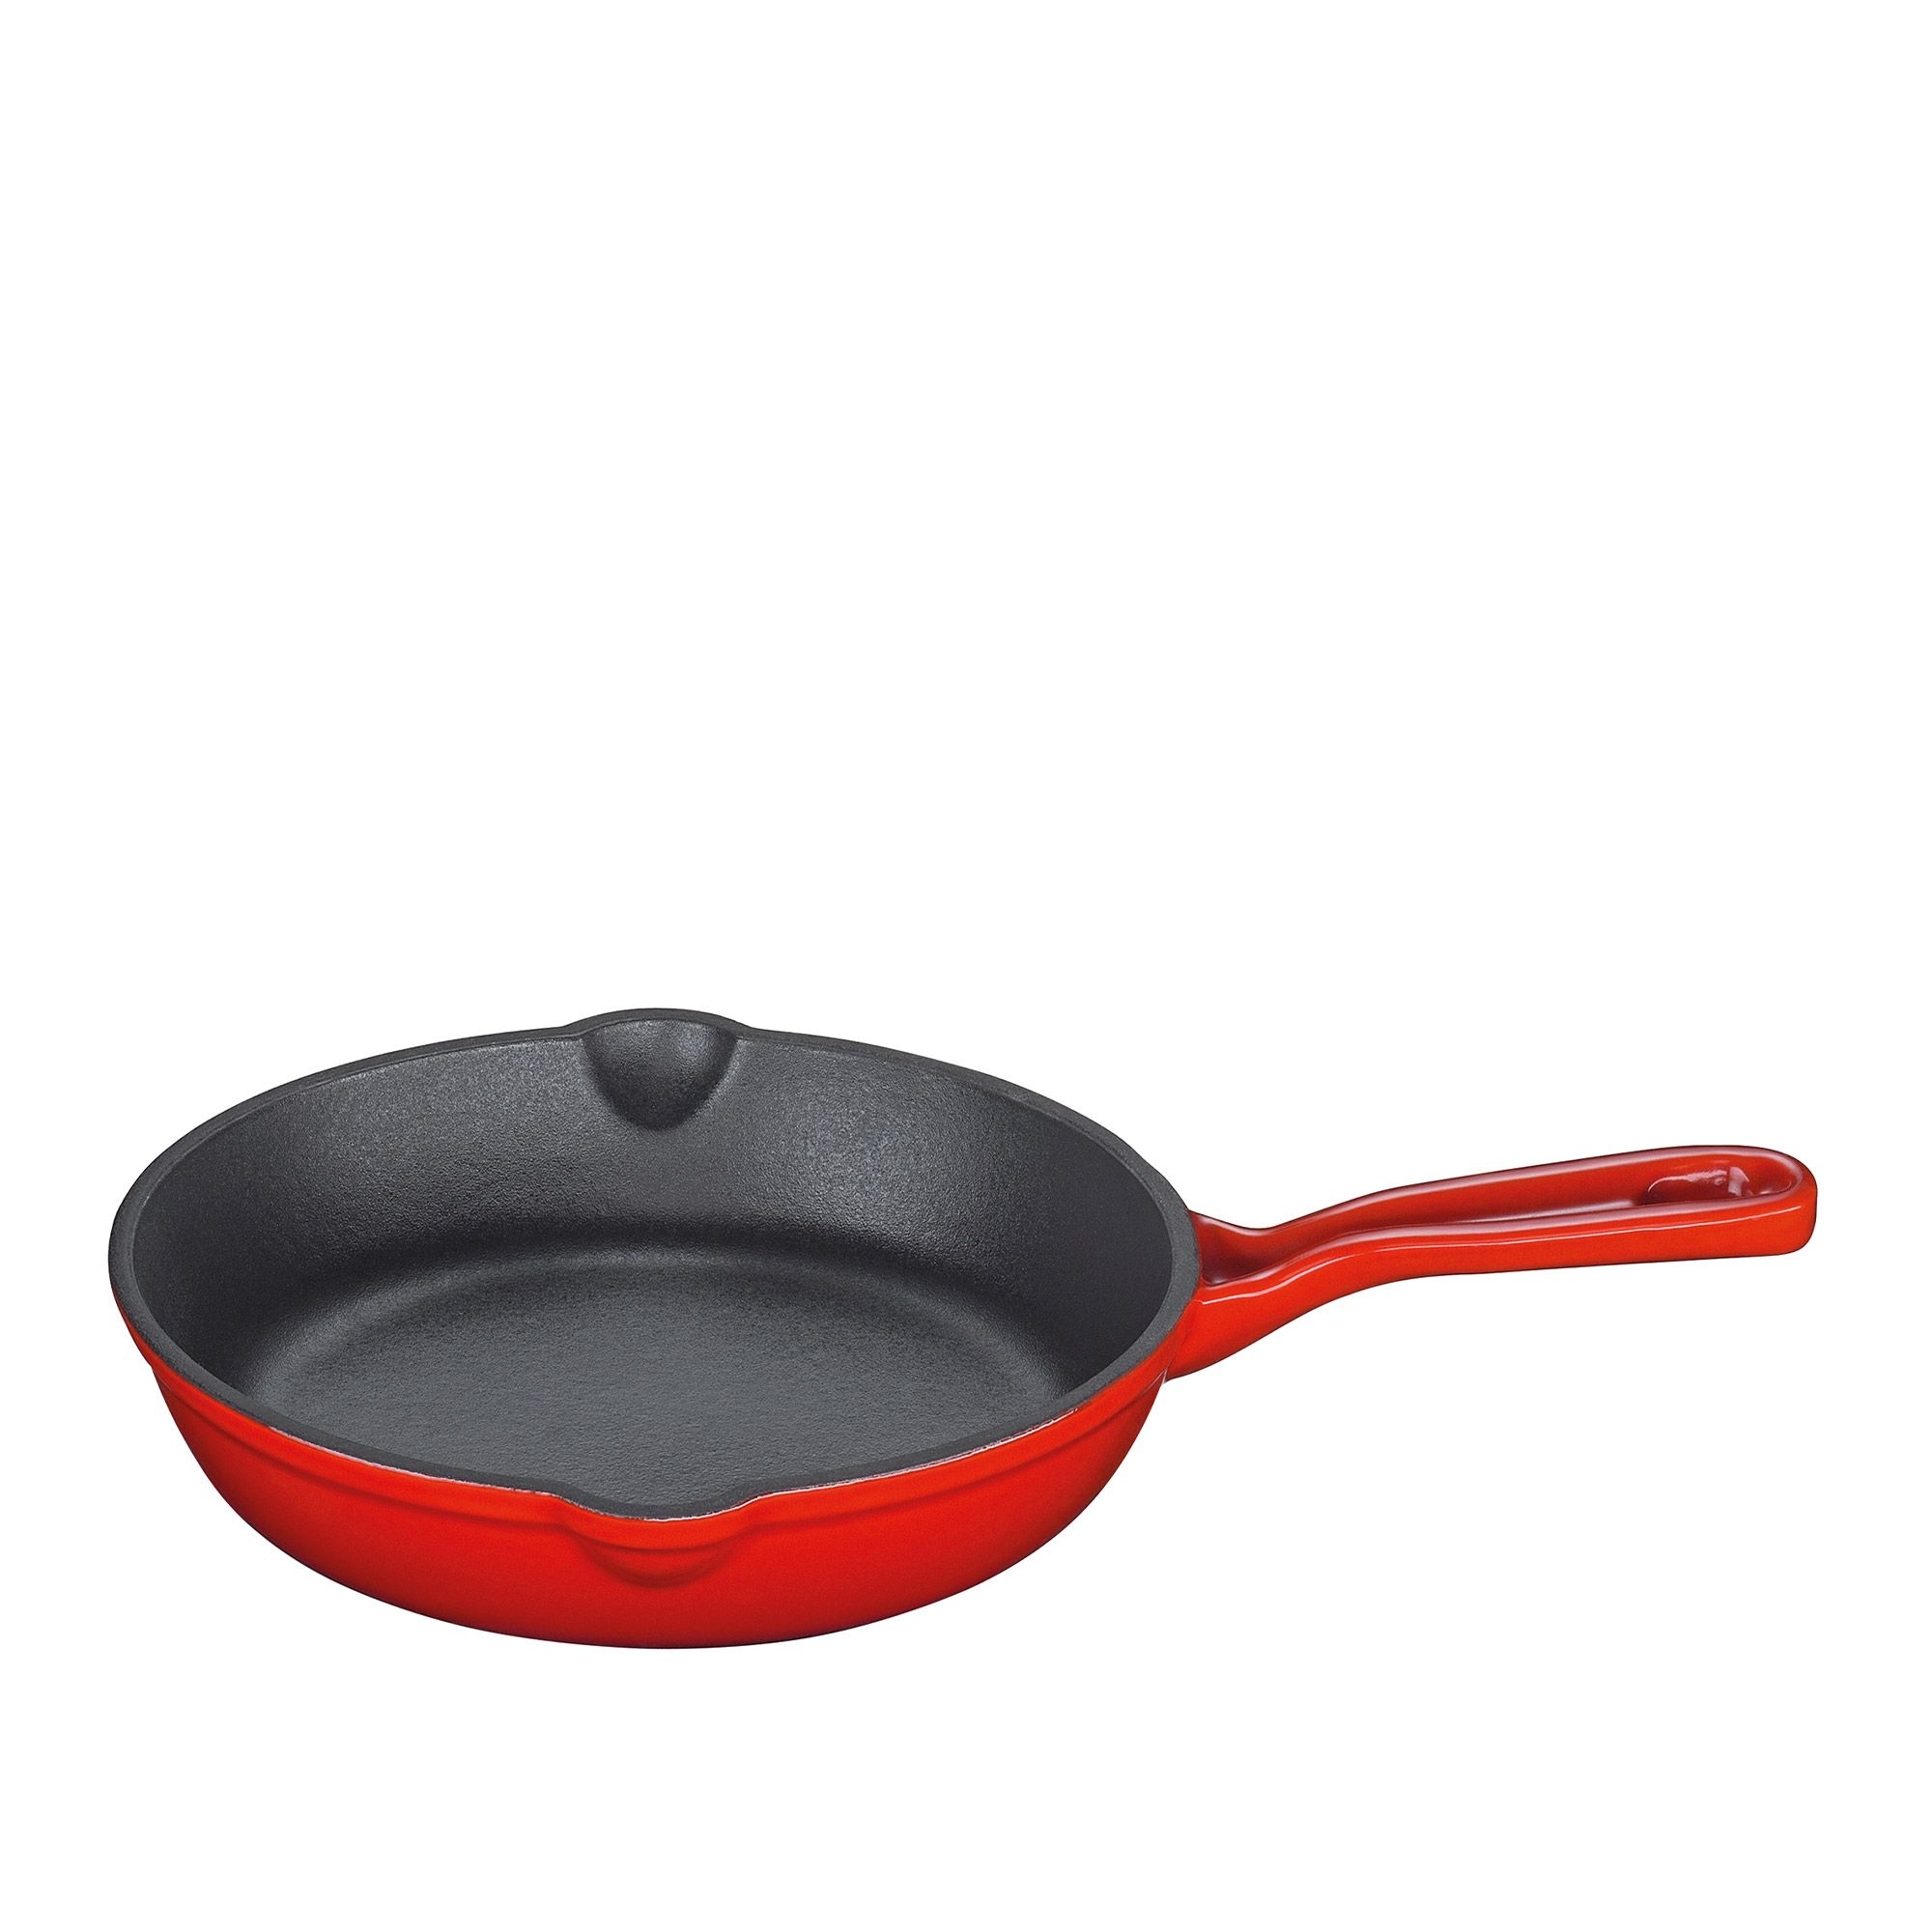 Küchenprofi - PROVENCE - Frying and serving pan - 16 cm - classic red